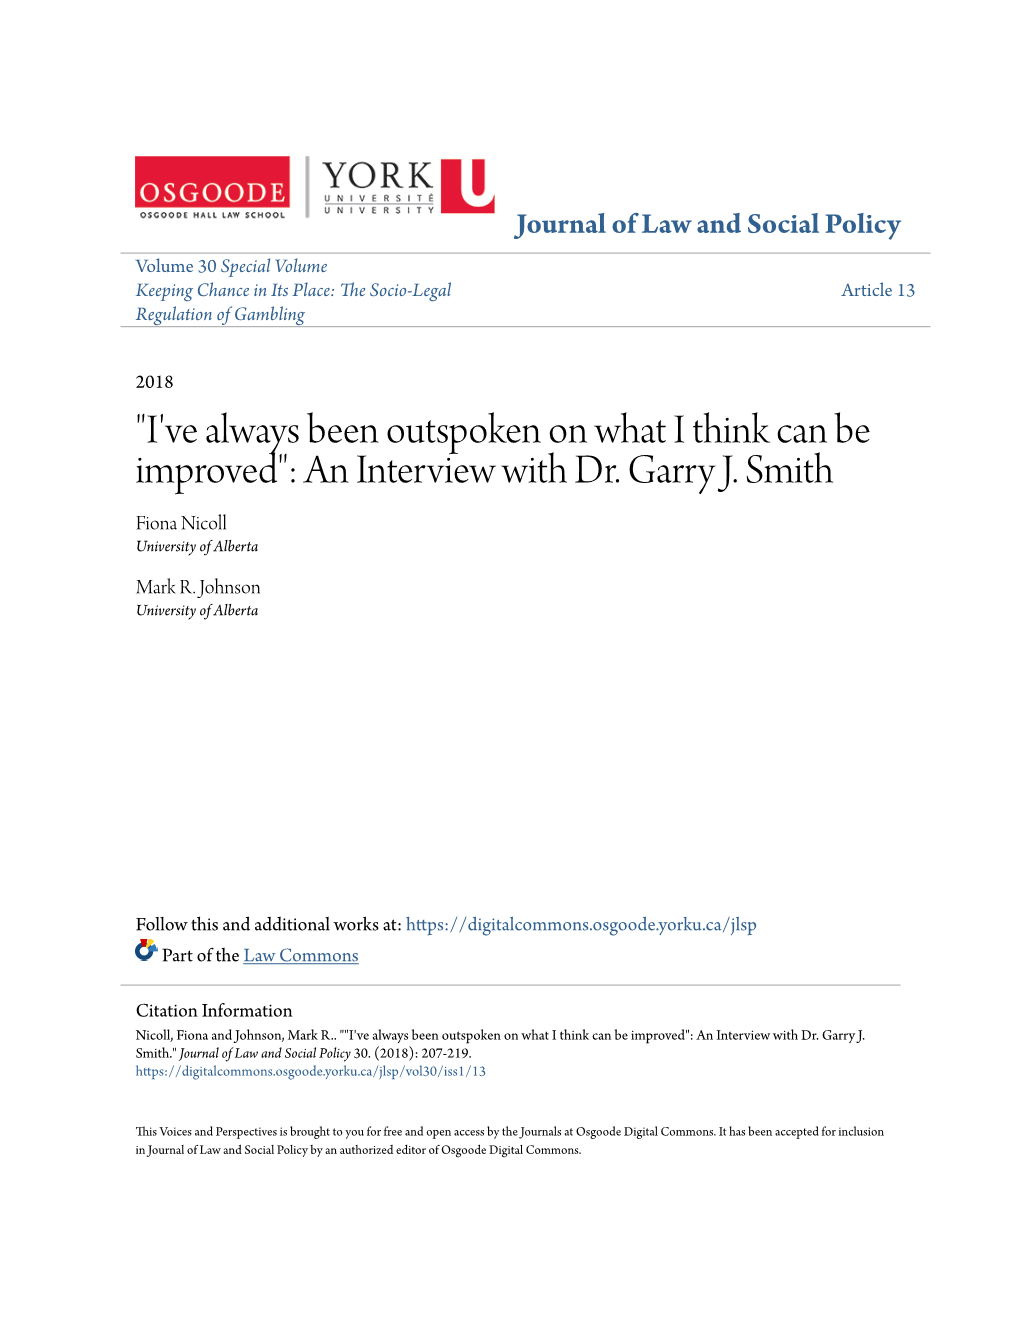 An Interview with Dr. Garry J. Smith Fiona Nicoll University of Alberta